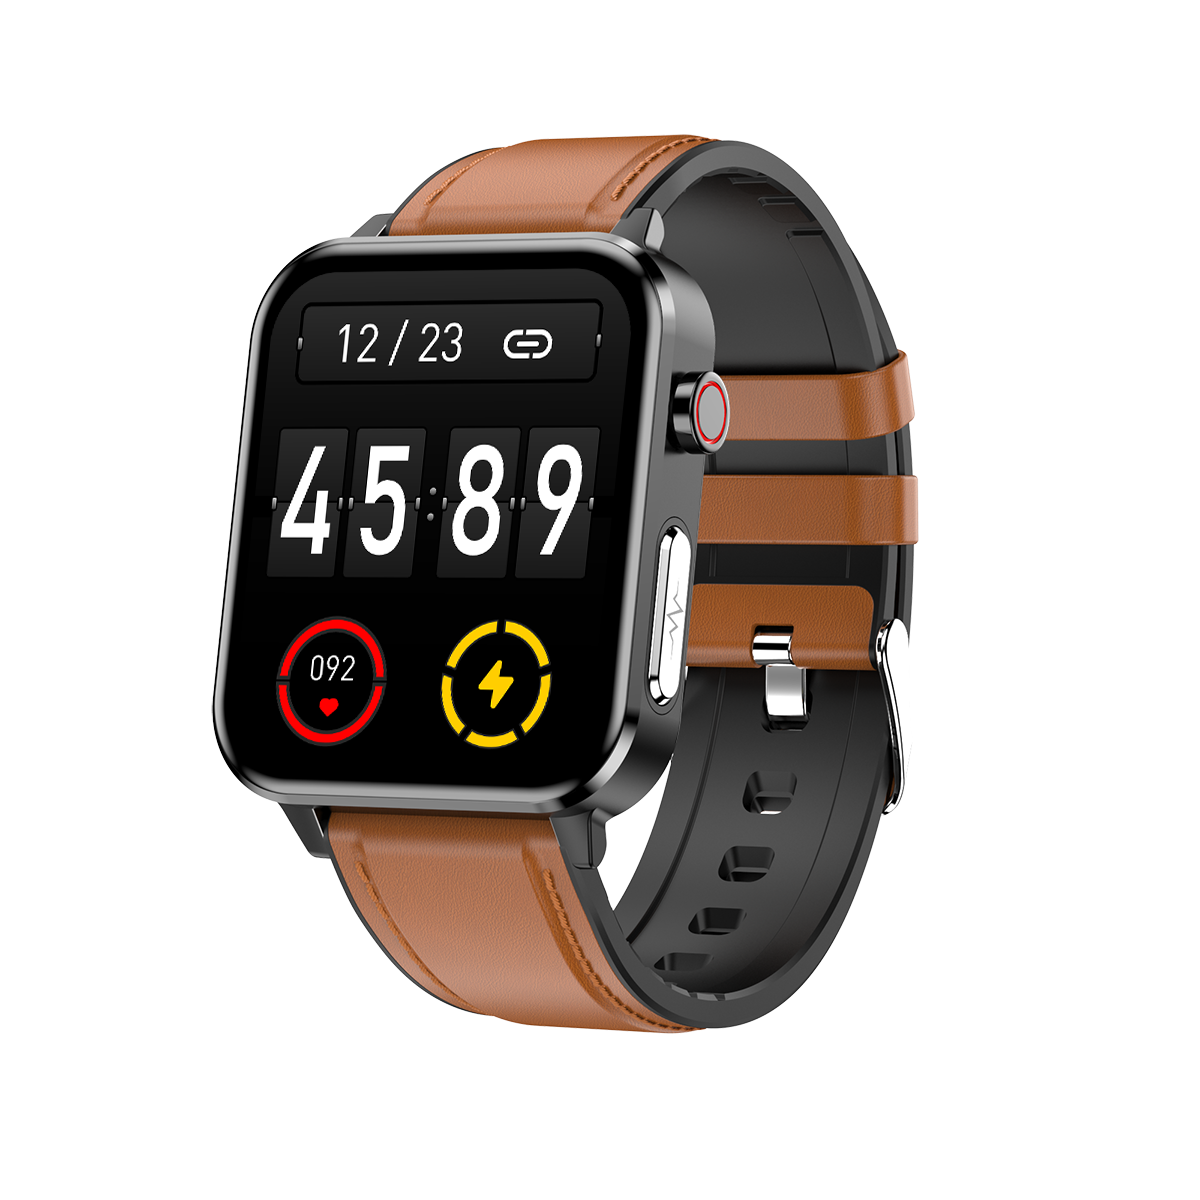 Fitness Smart Watch Phone with Touch Display ECG Monitor E86